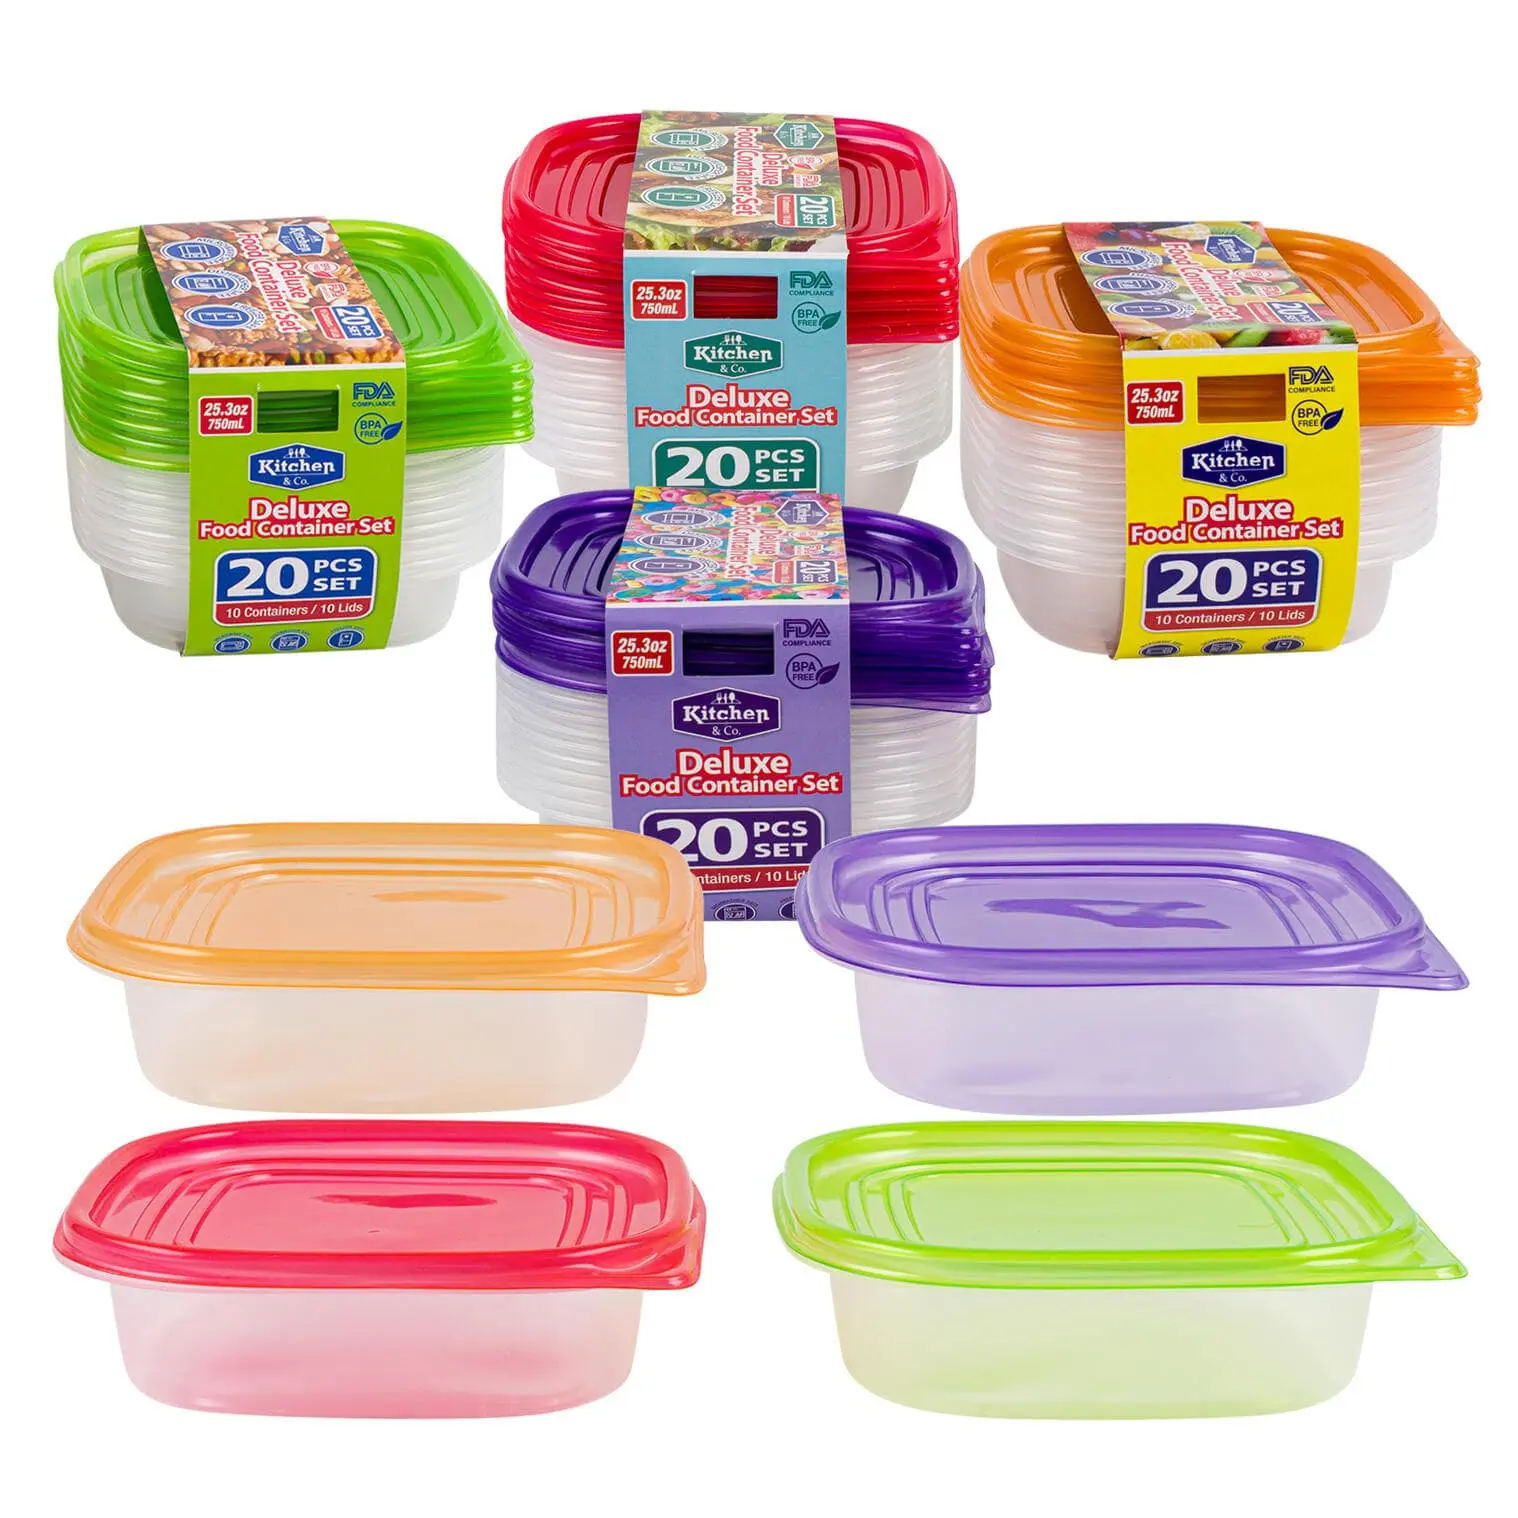 https://theceocreative.com/wp-content/uploads/2023/05/20pc-Shallow-Food-Container-Set.webp